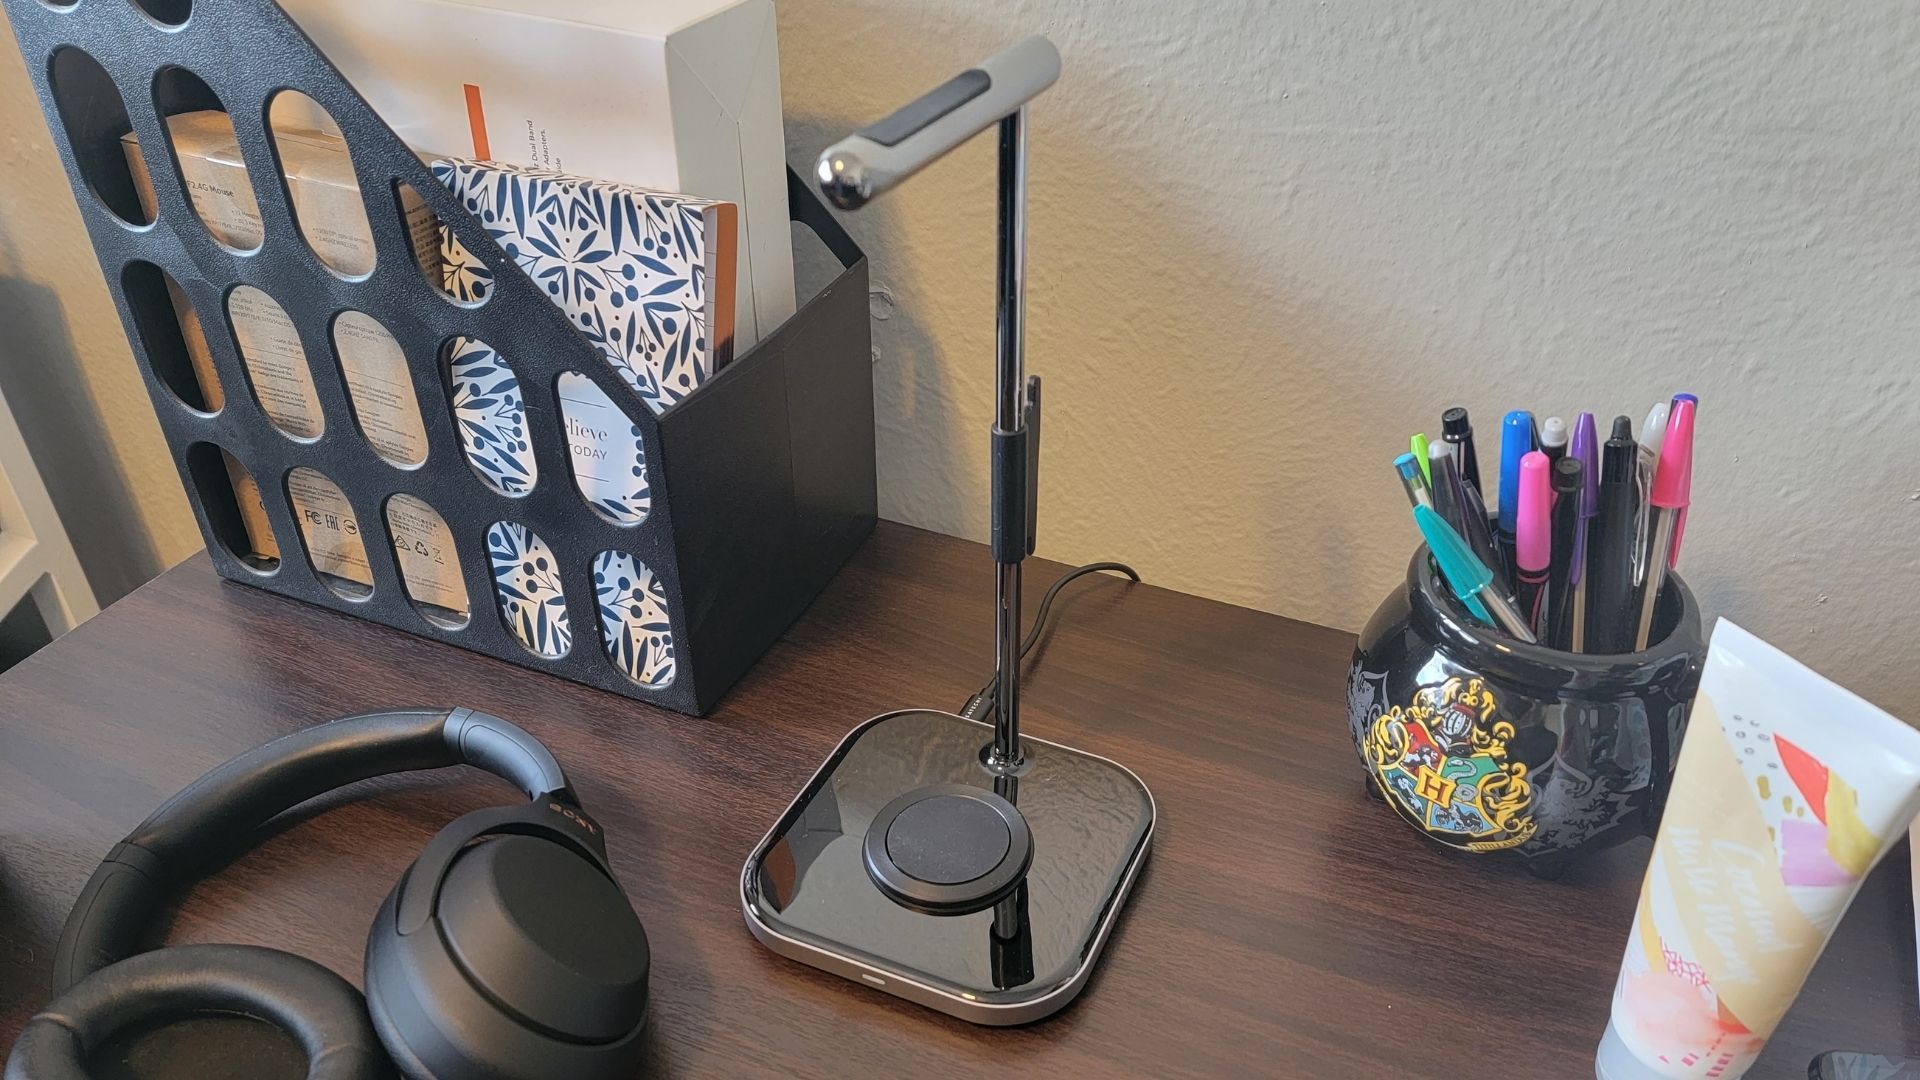 satechi's two in one wireless charging stand without any devices on it.